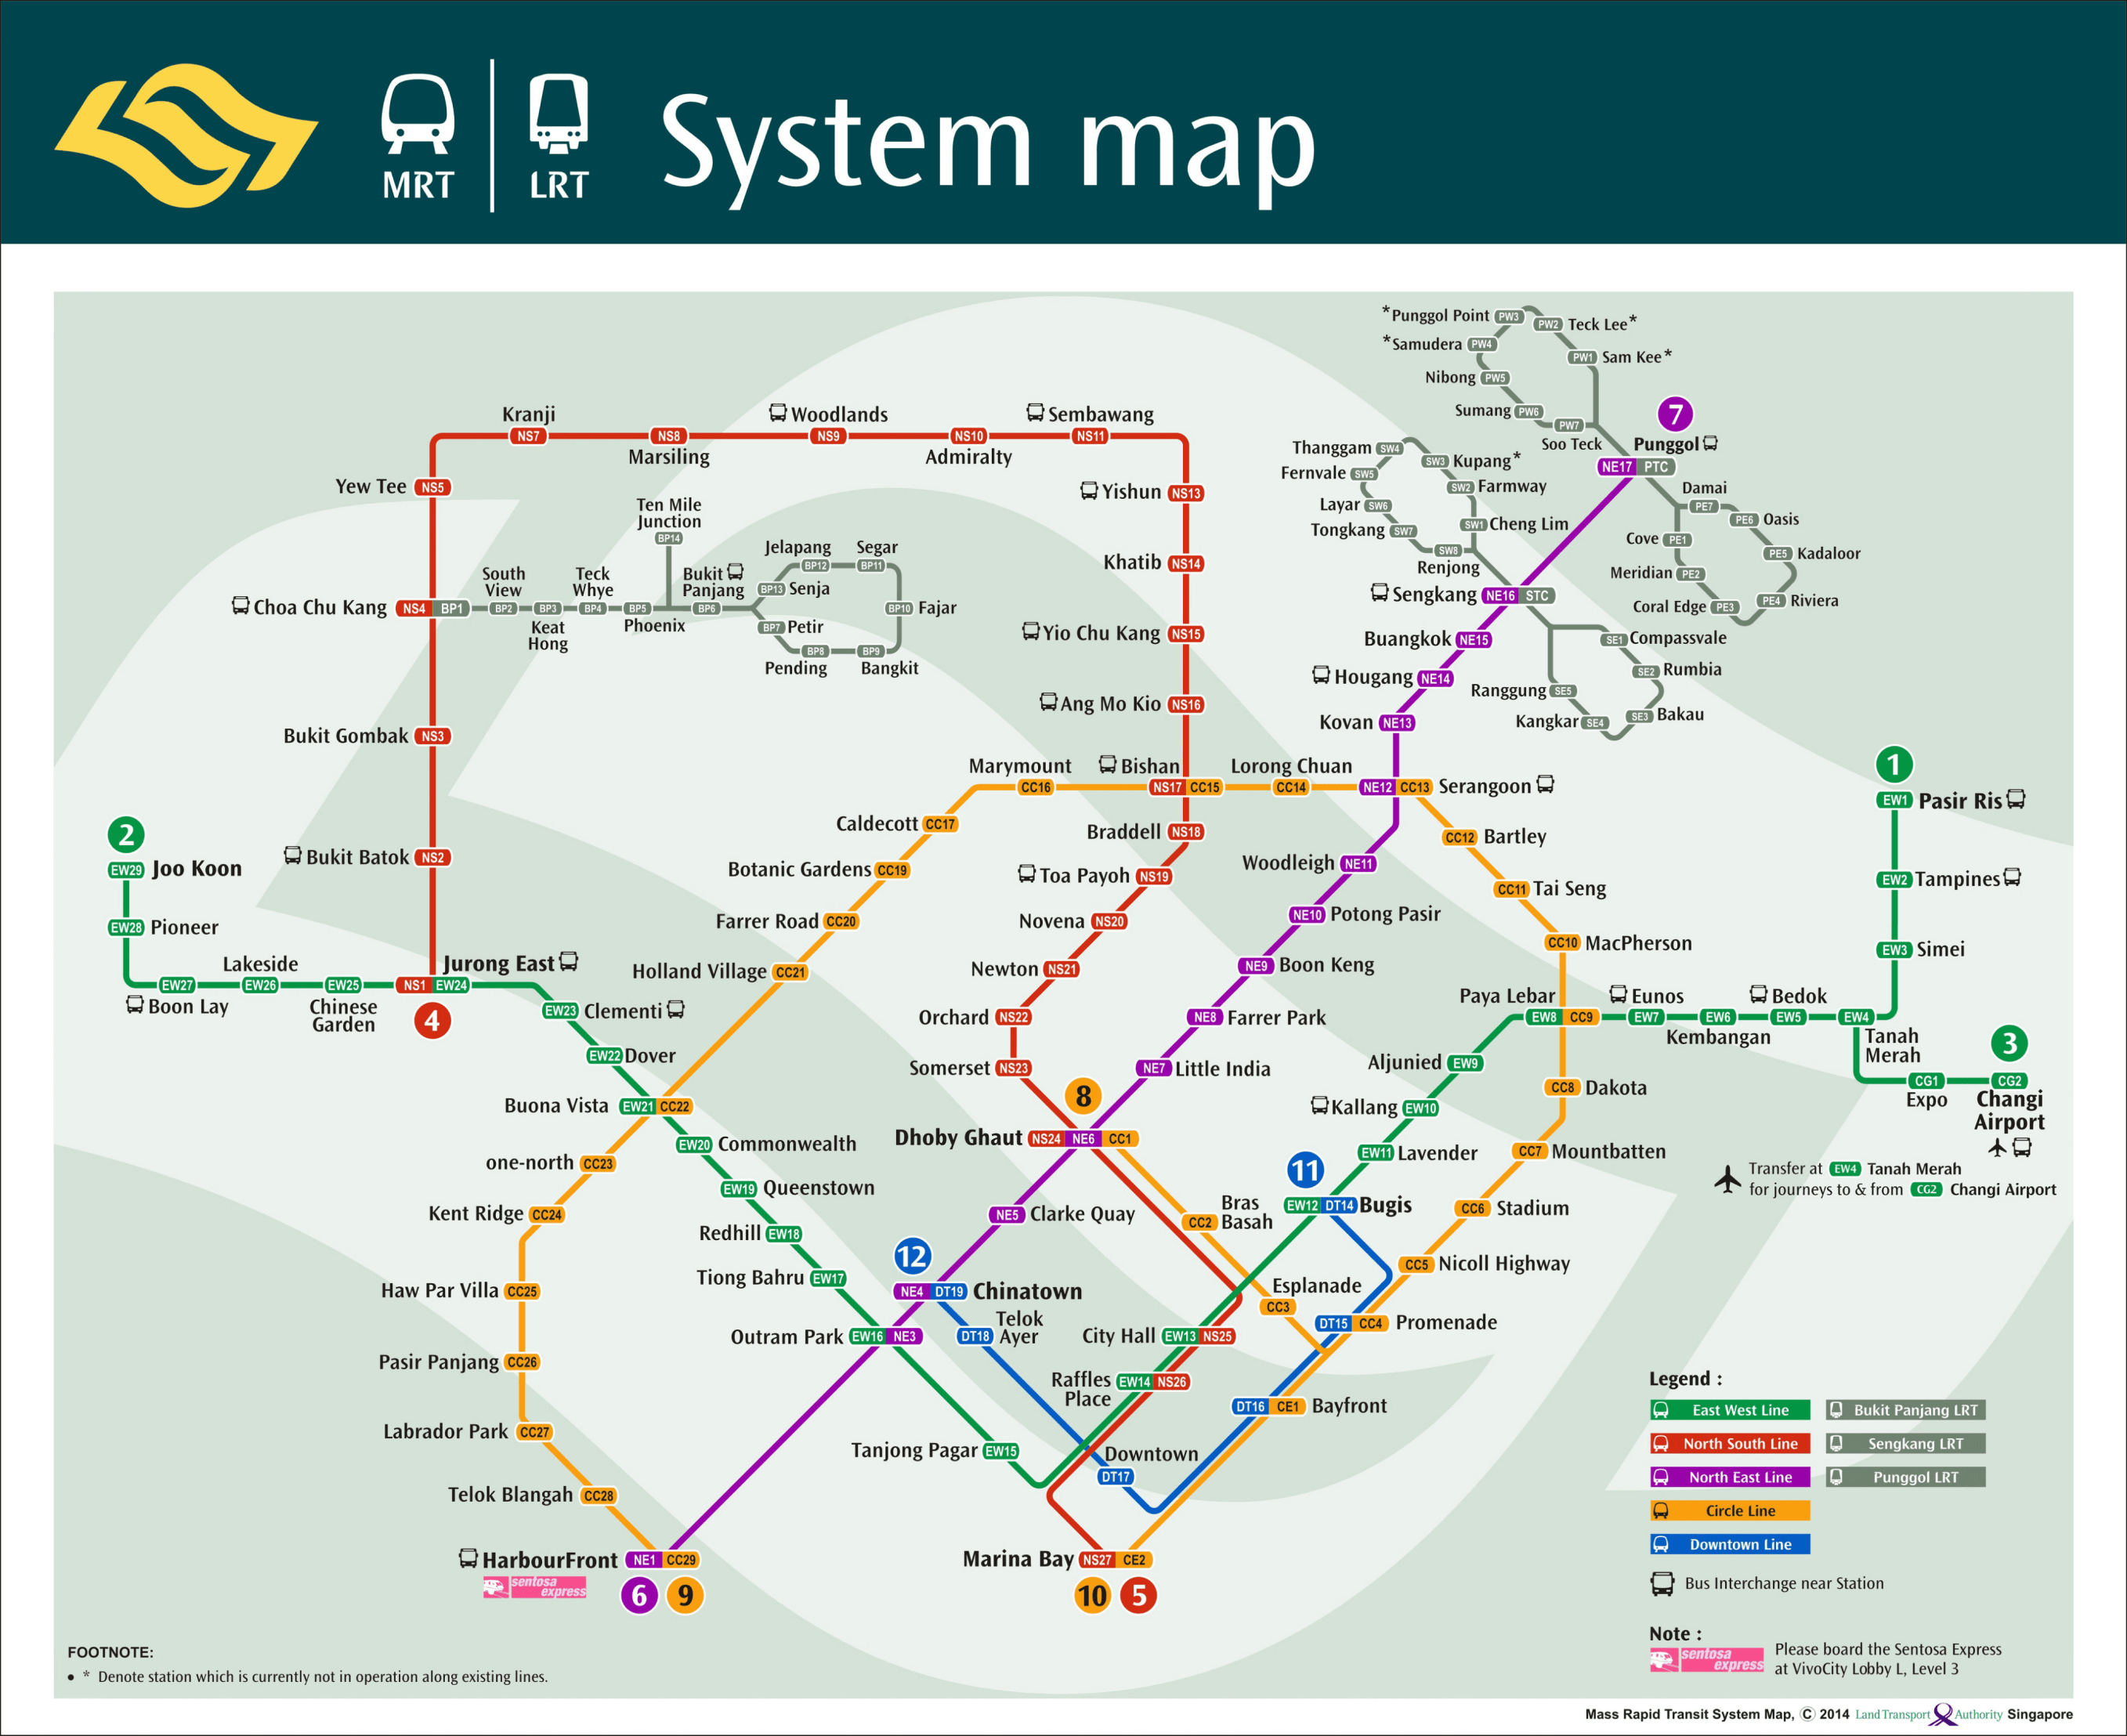 MRT Map from 2014